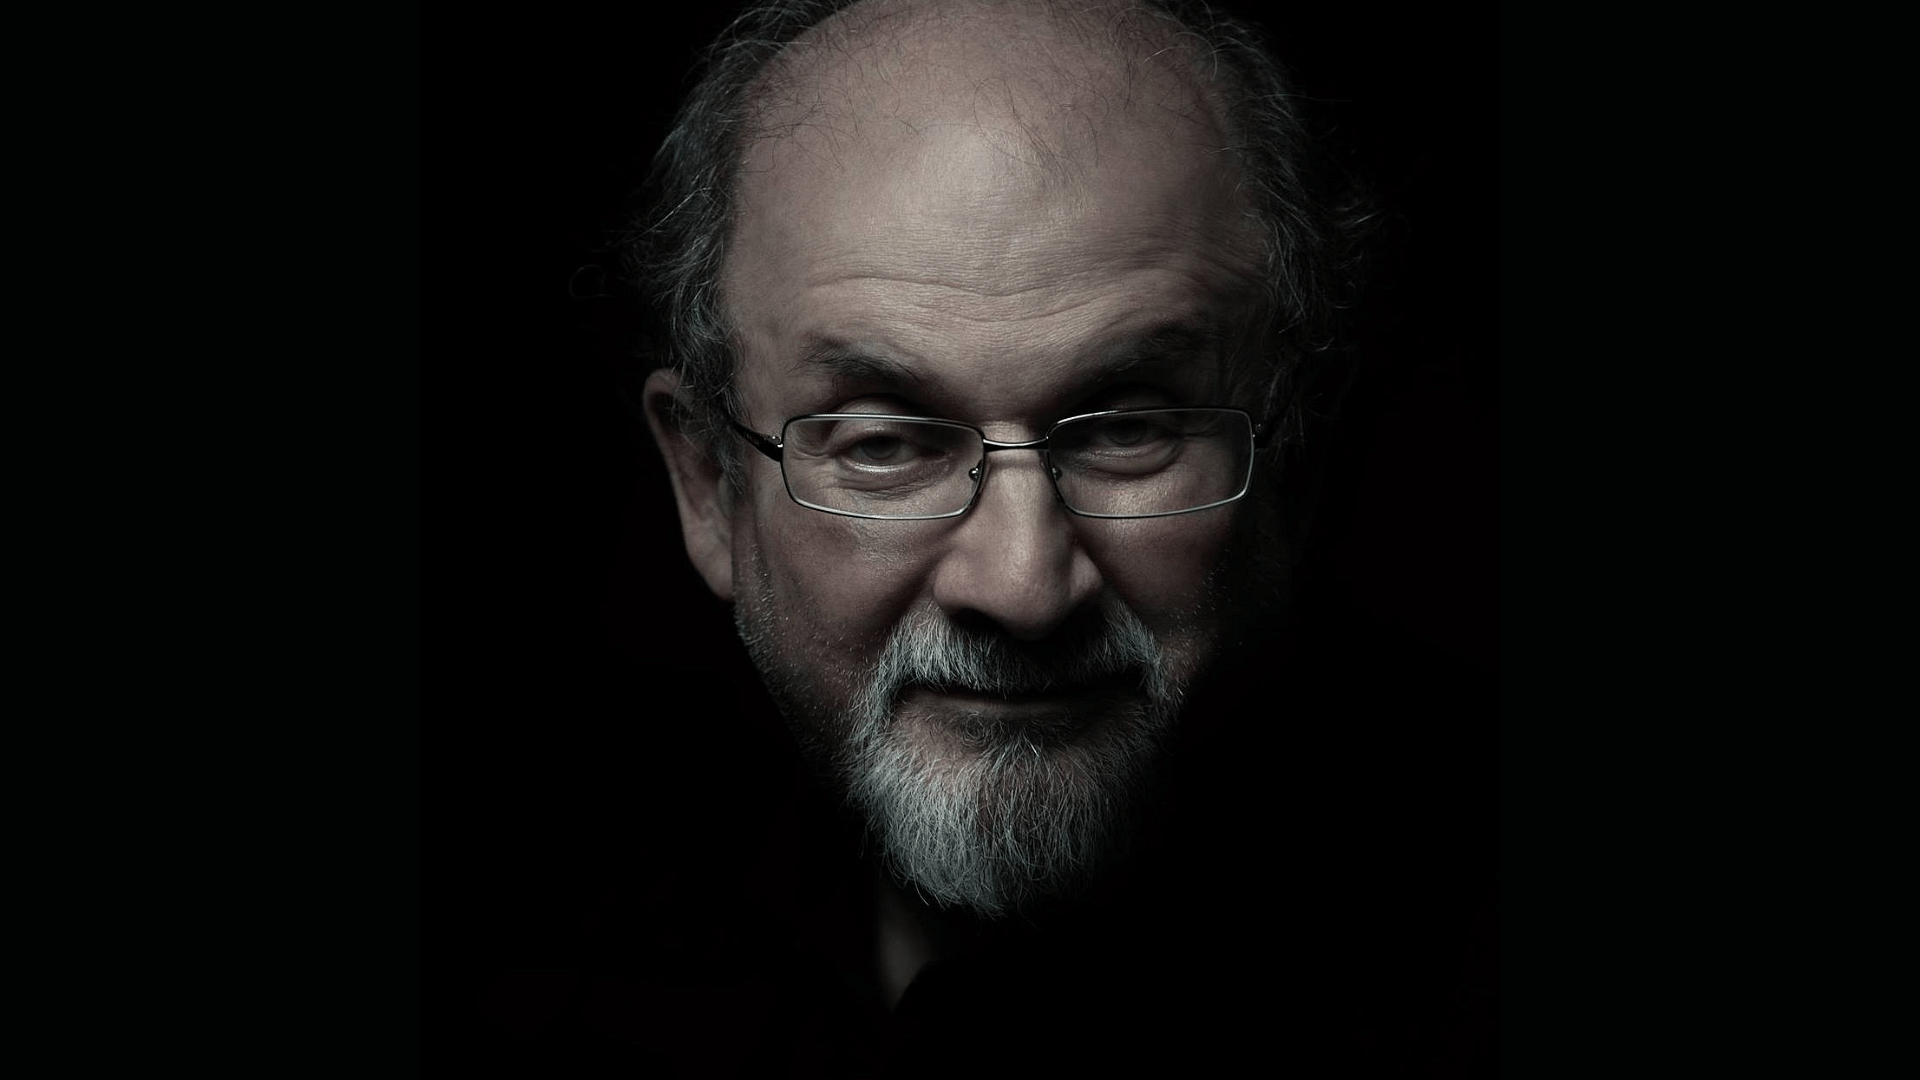 <div class="paragraphs"><p>75-year-old Salman Rushdie was <a href="https://www.thequint.com/news/world/indian-origin-british-author-salman-rushdie-attack-new-york-controversies">stabbed</a> in the neck and torso at the Chautauqua Institution in New York on 12 August.</p></div>